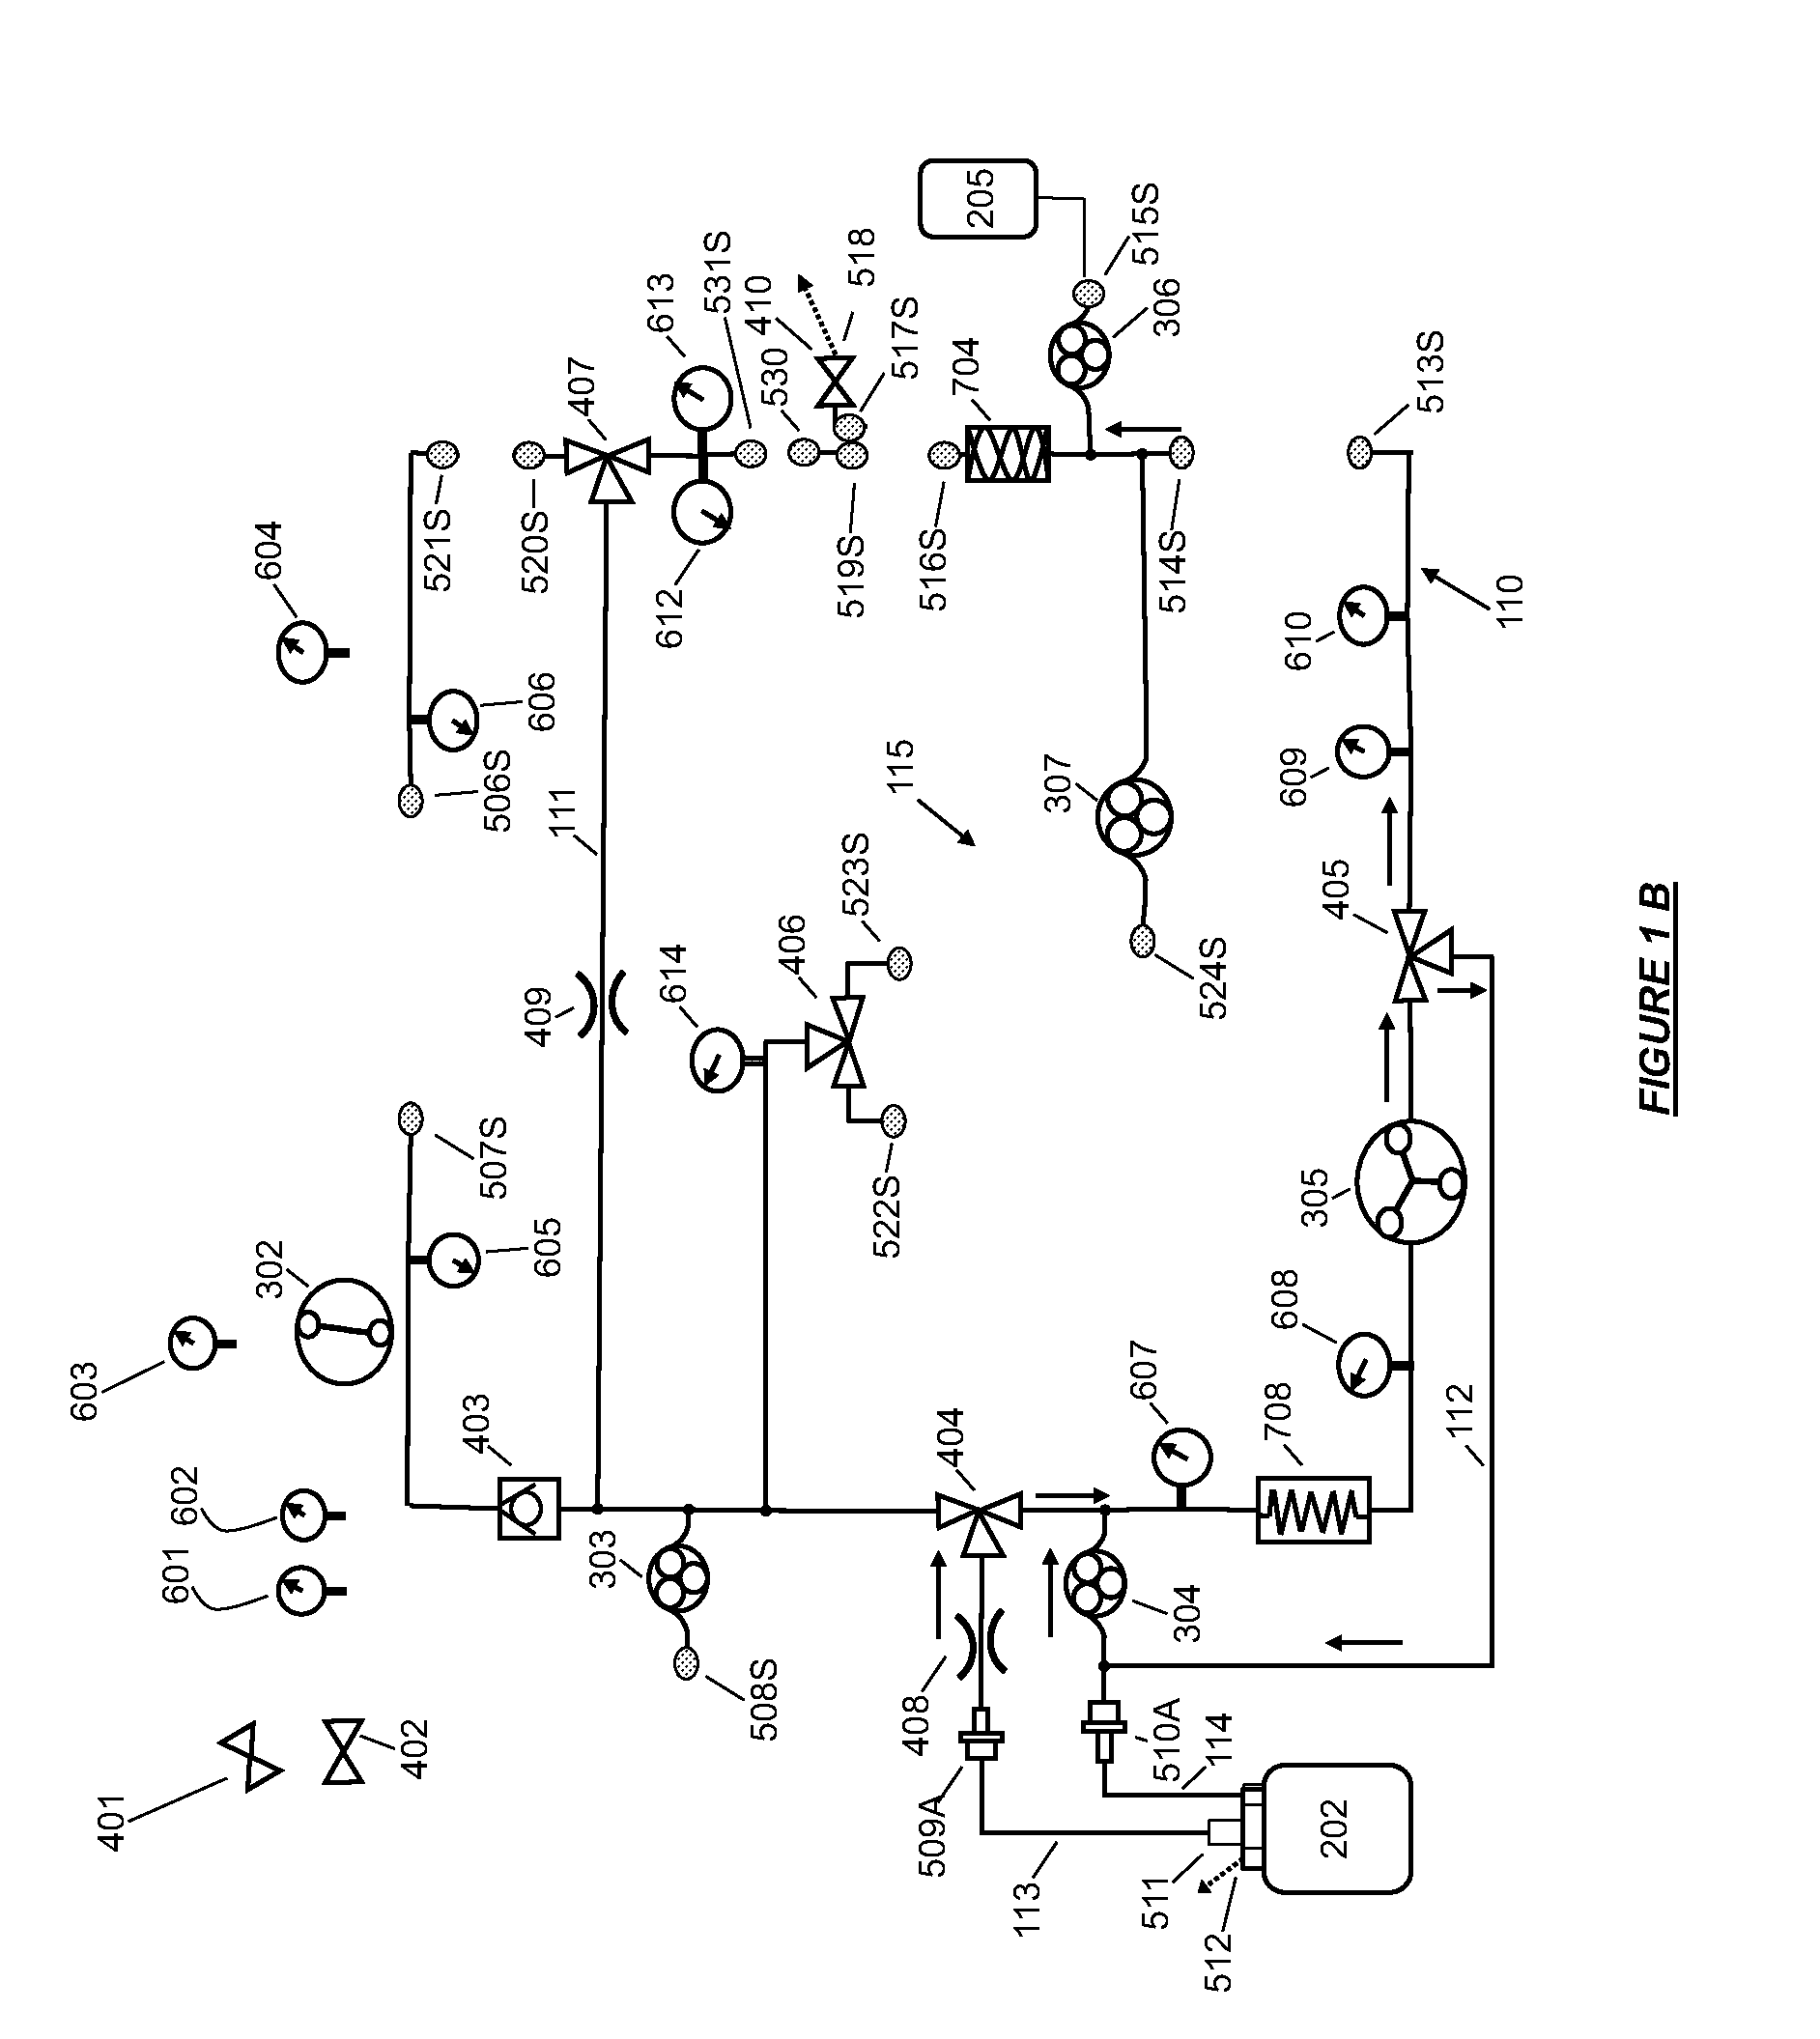 Sodium and buffer source cartridges for use in a modular controlled compliant flow path